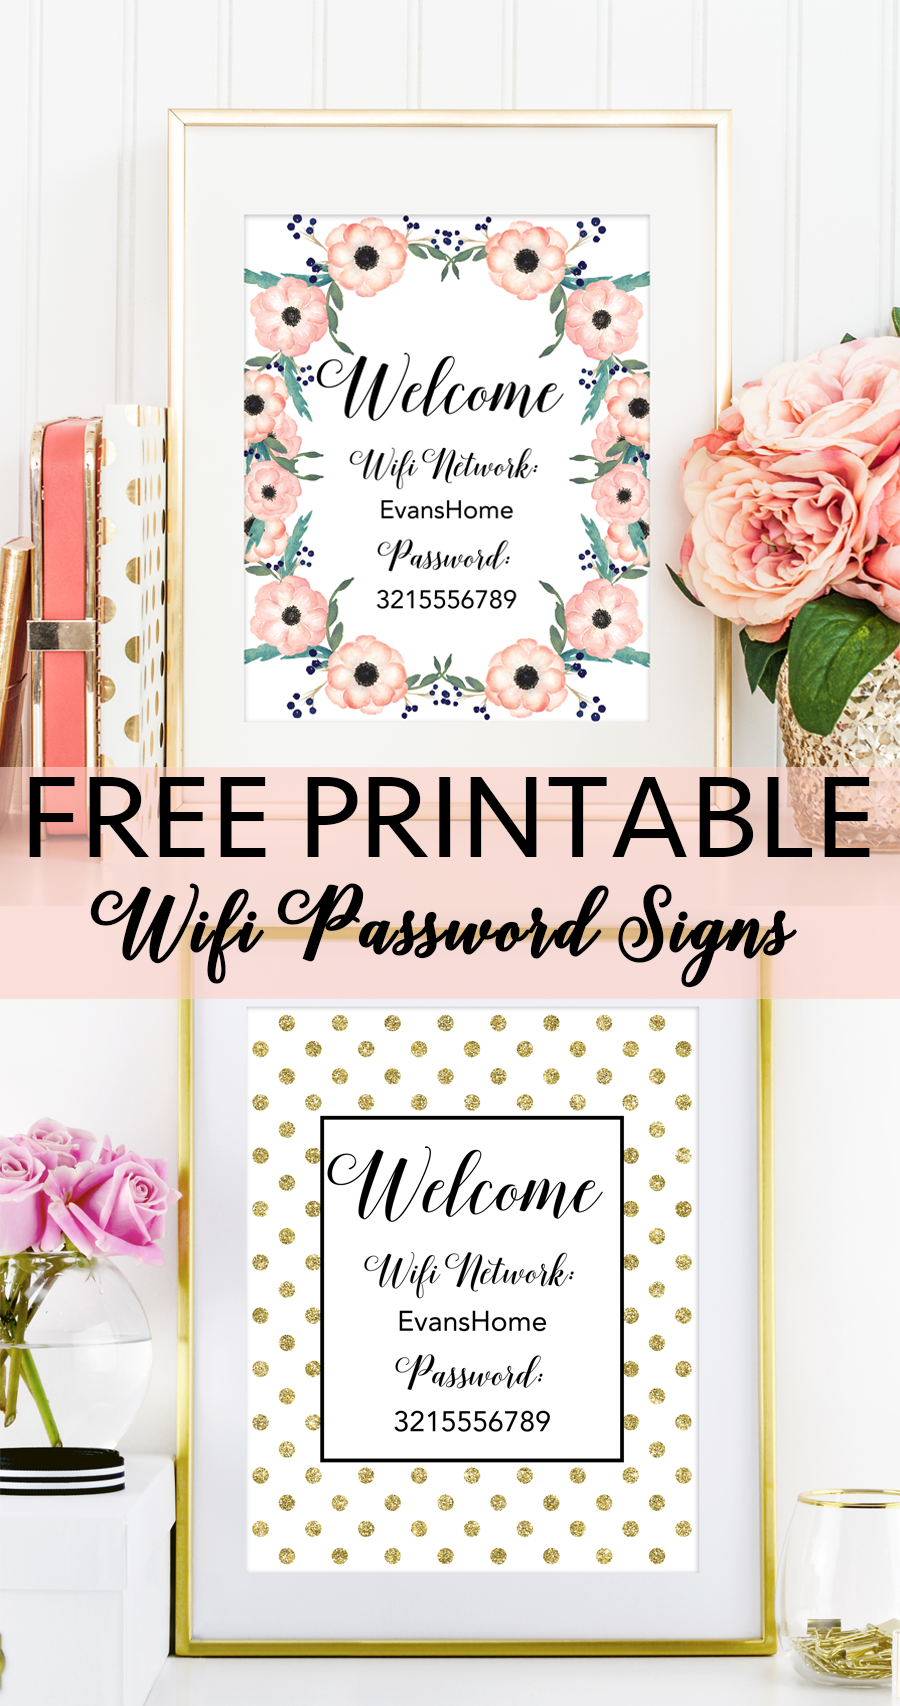 Free Printable Wifi Password Signs | Decorating Ideas - Home Decor - Free Printable Bedroom Door Signs